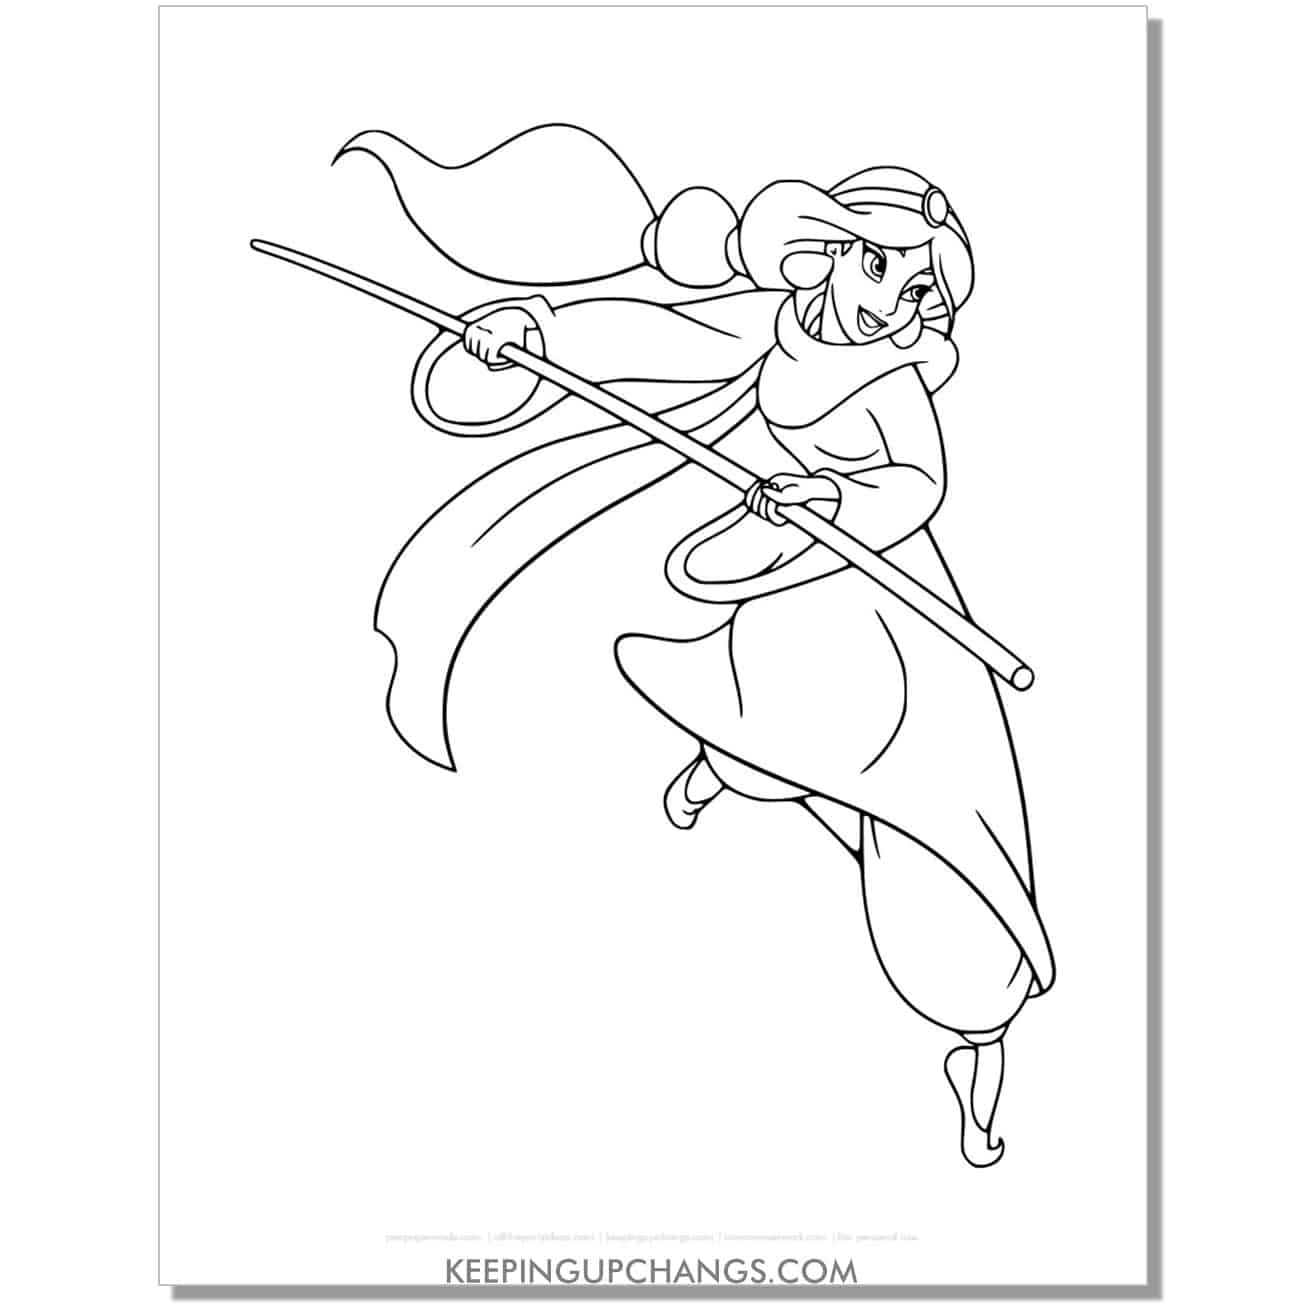 jasmine with staff stick coloring page, sheet.